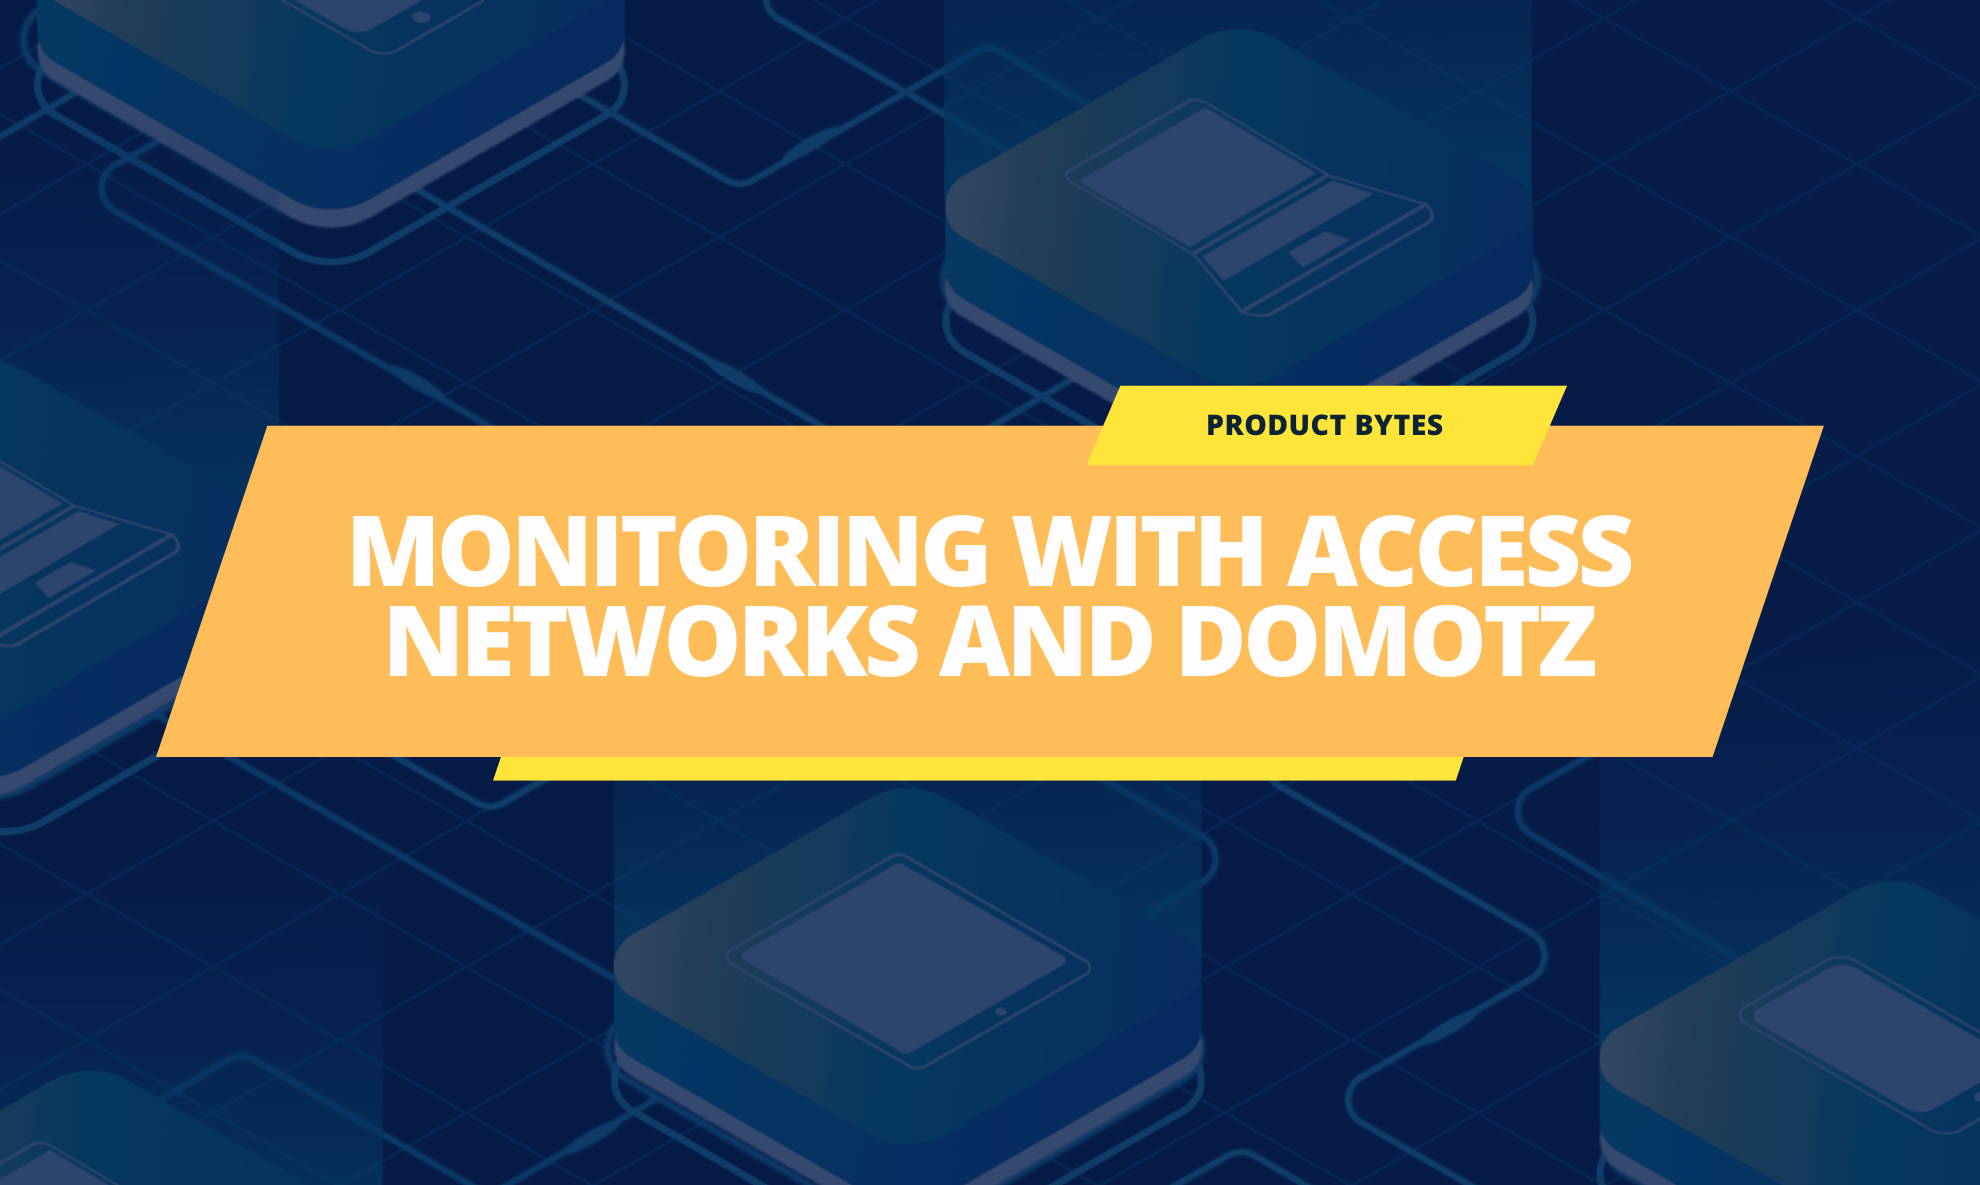 Access Networks and Domotz Deliver a Unified Monitoring Experience